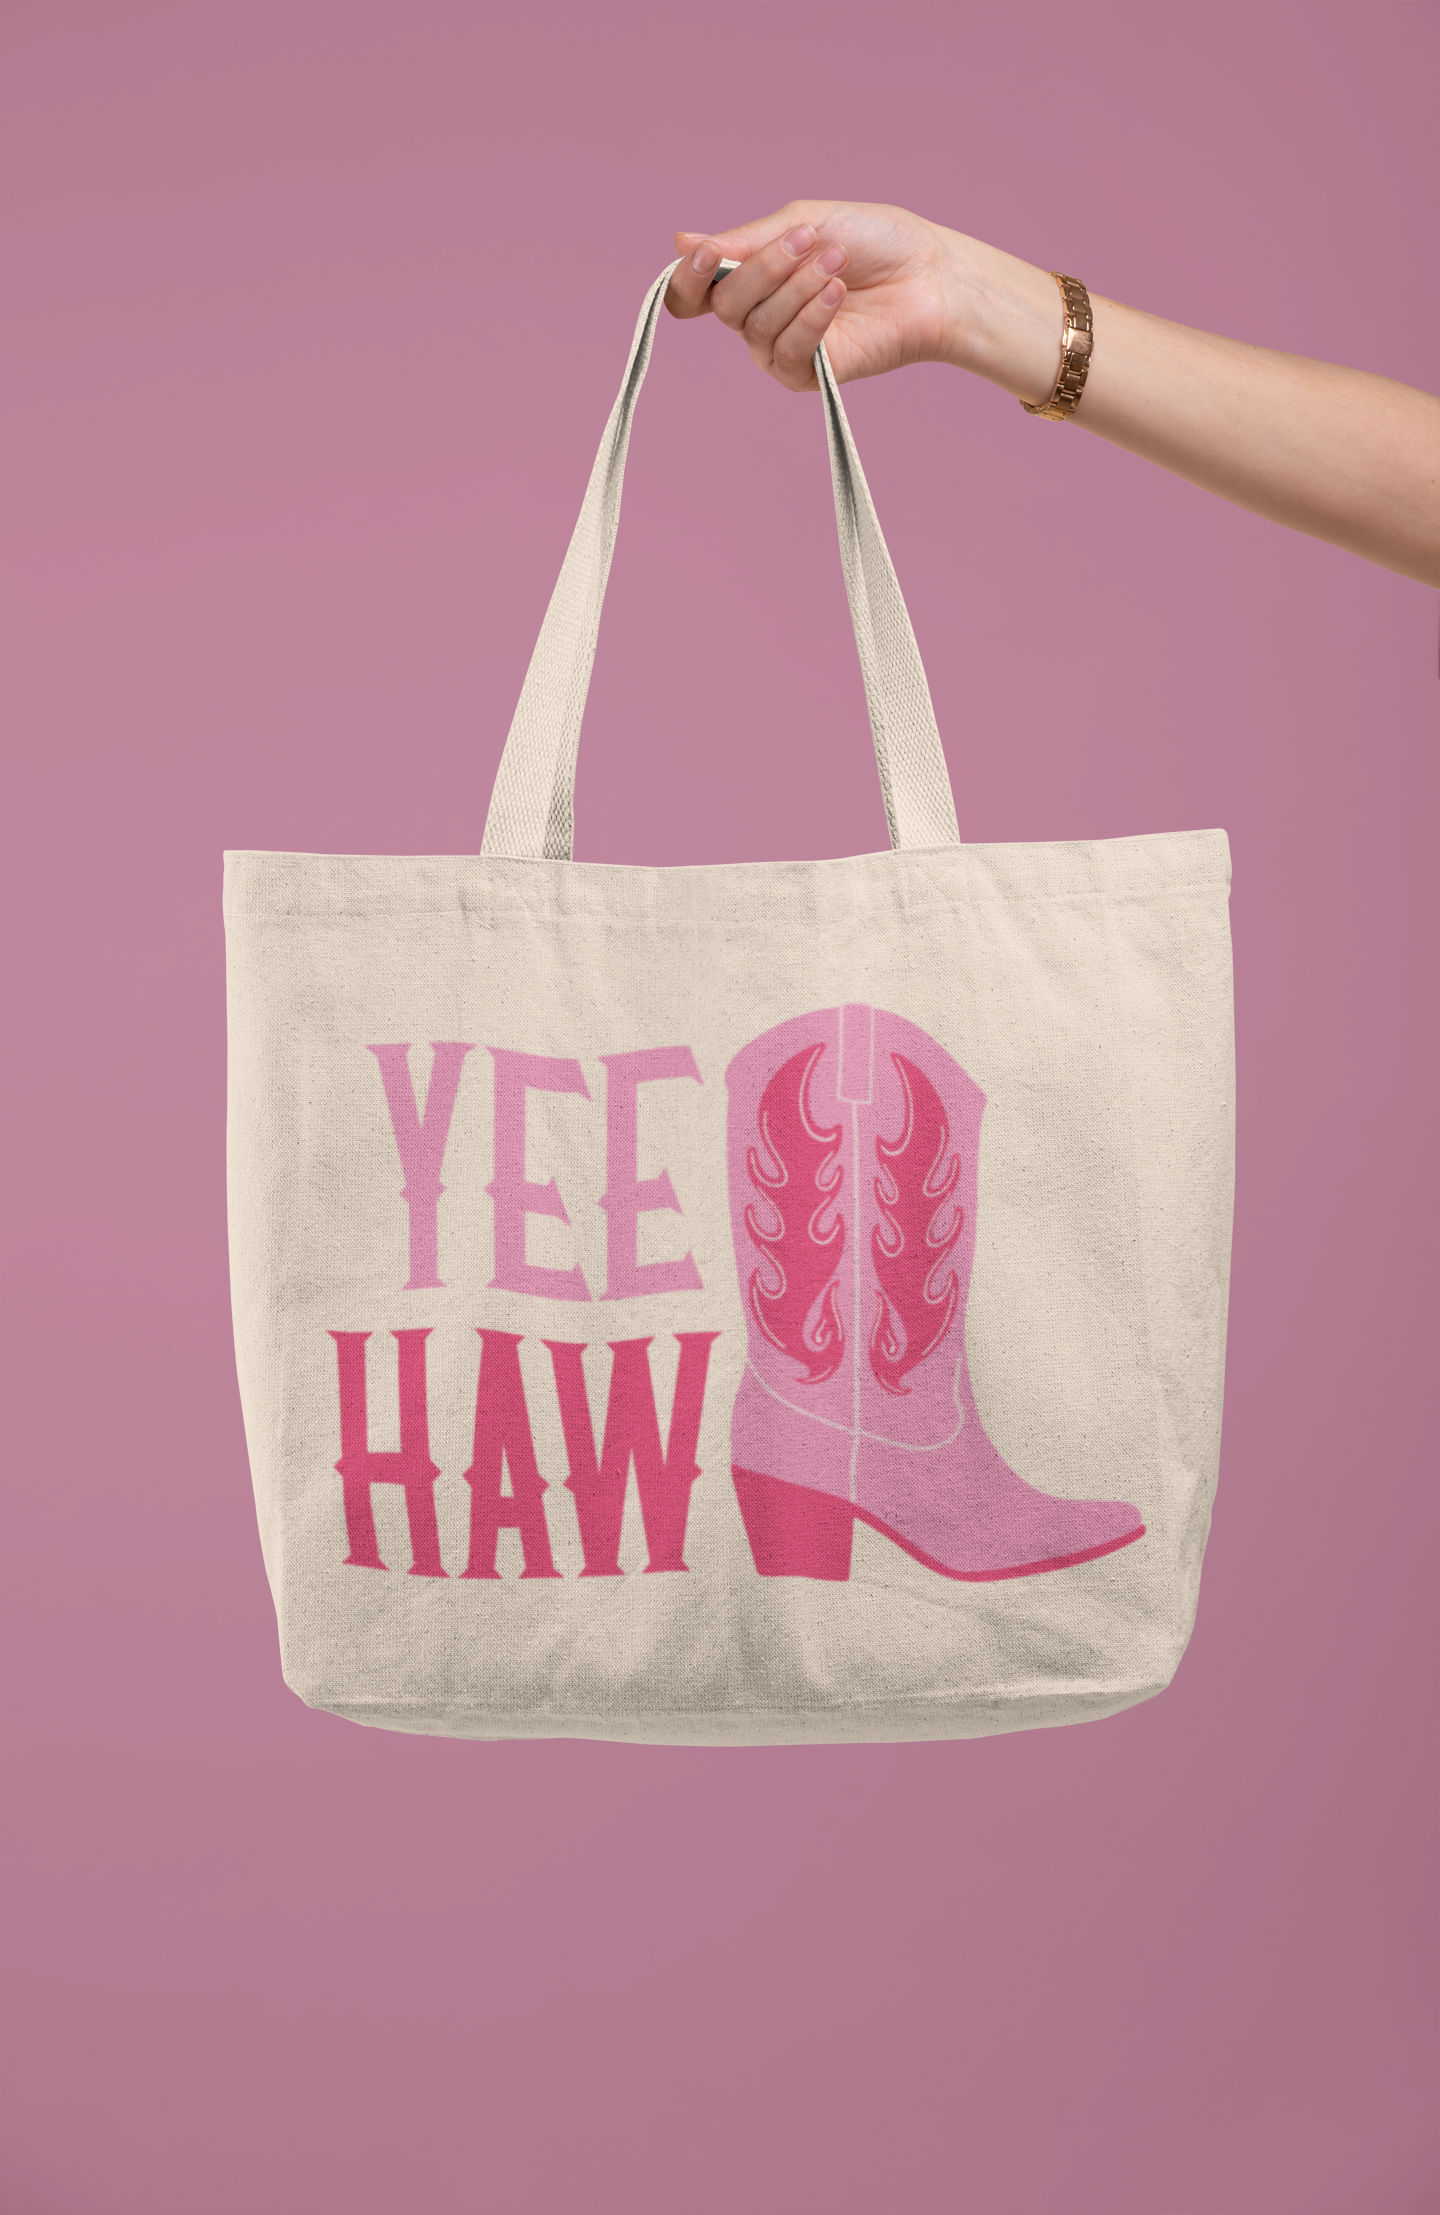 Yee Haw Country Western Cowgirl SVG Digital Download Design File